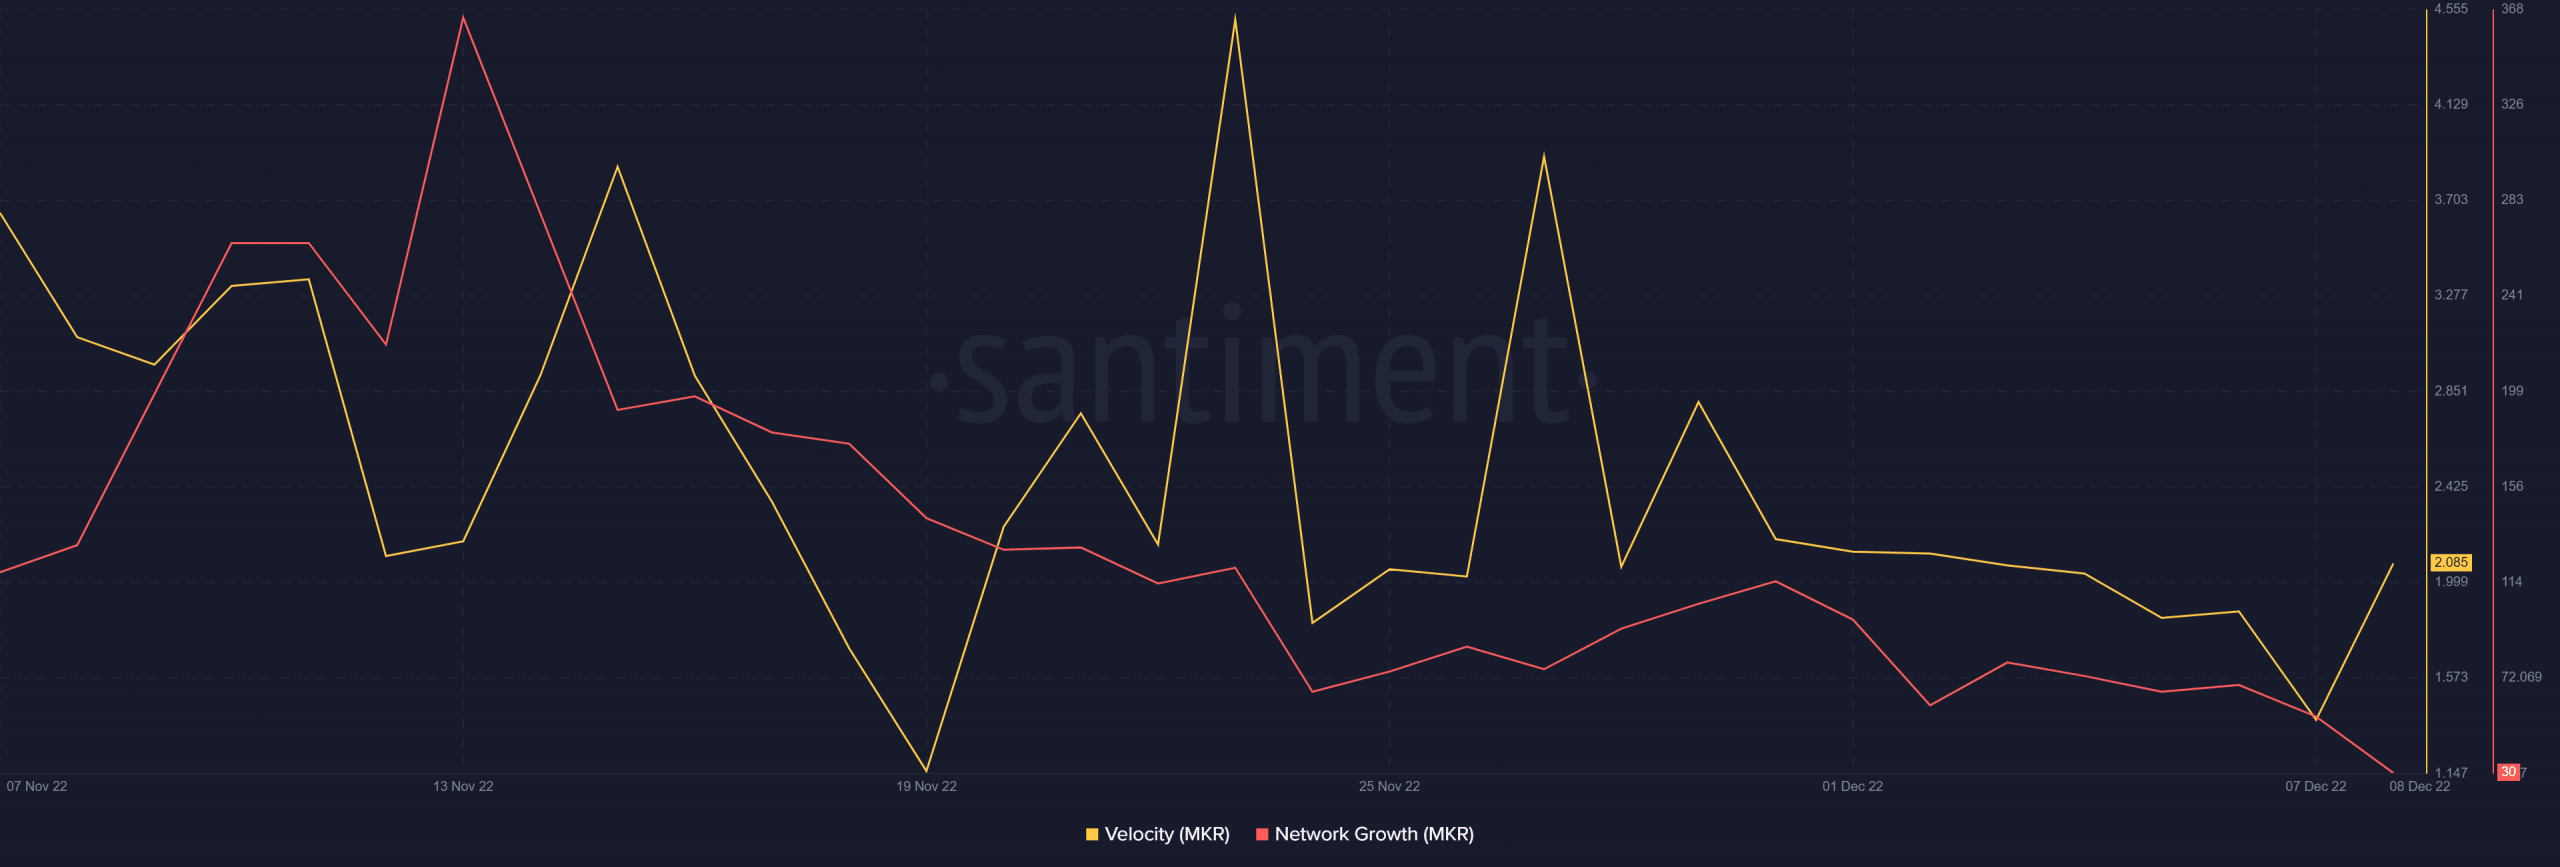 MakerDAO network growth and velocity